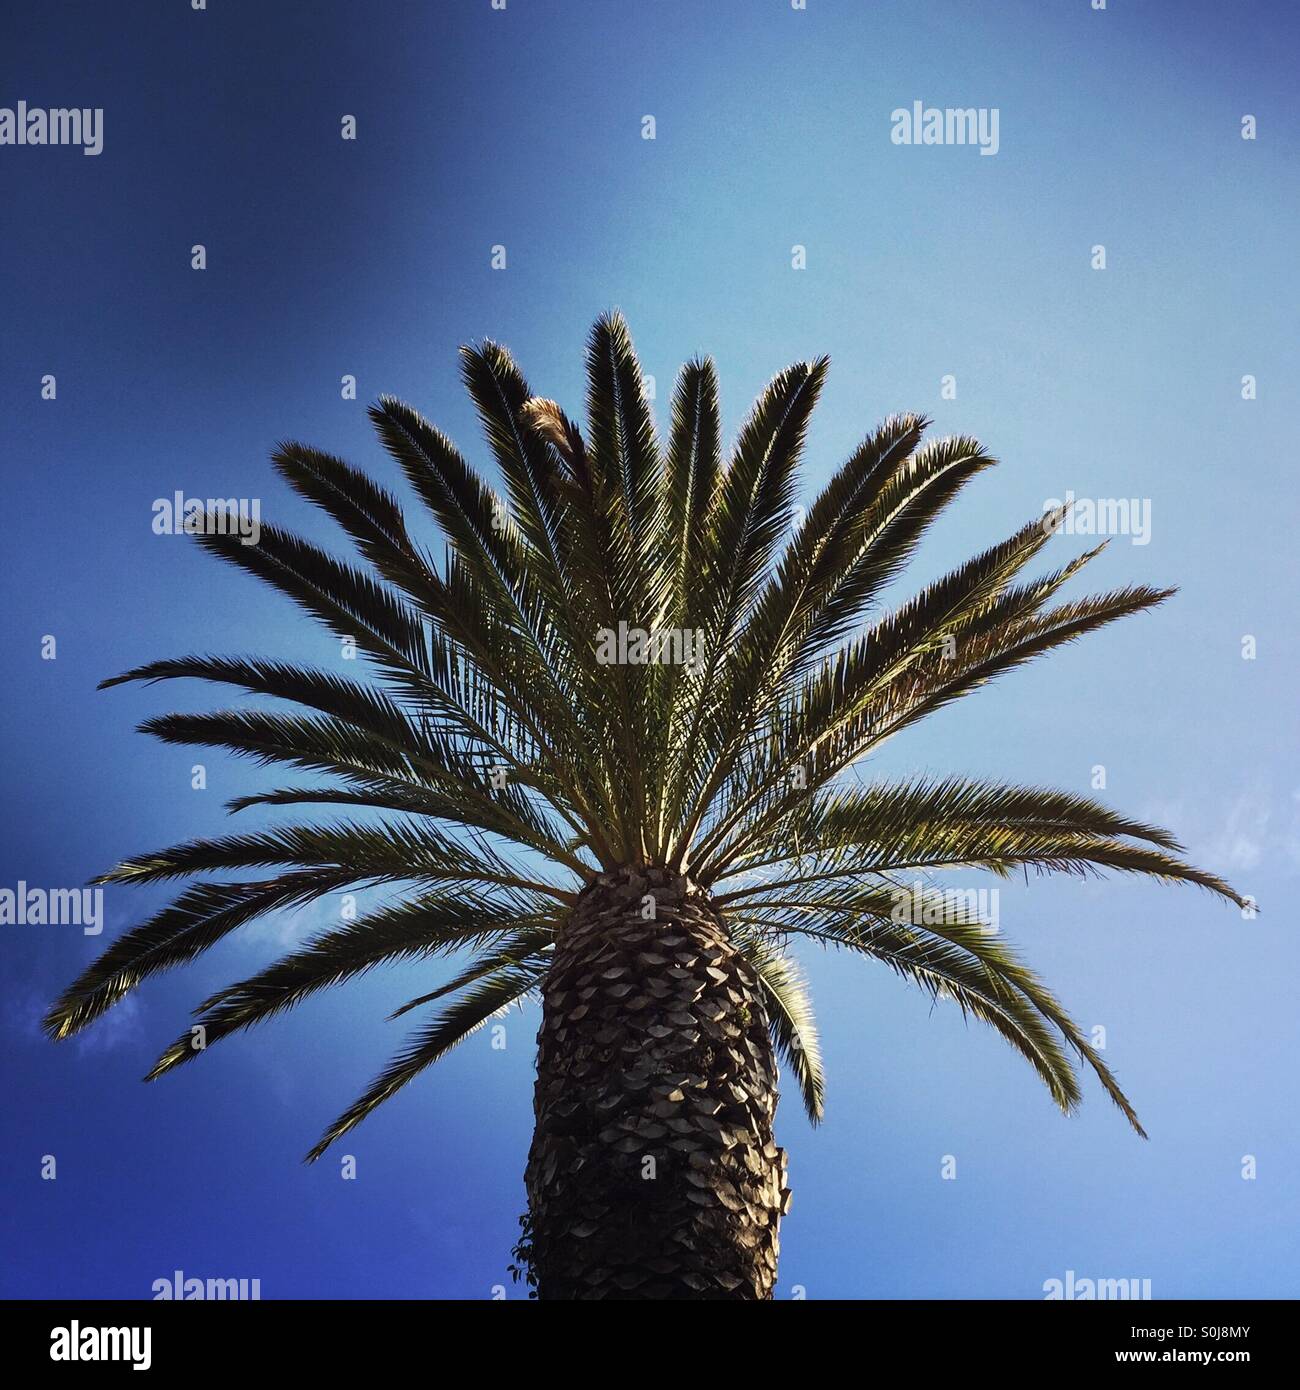 A Mexican Palm Tree. Stock Photo